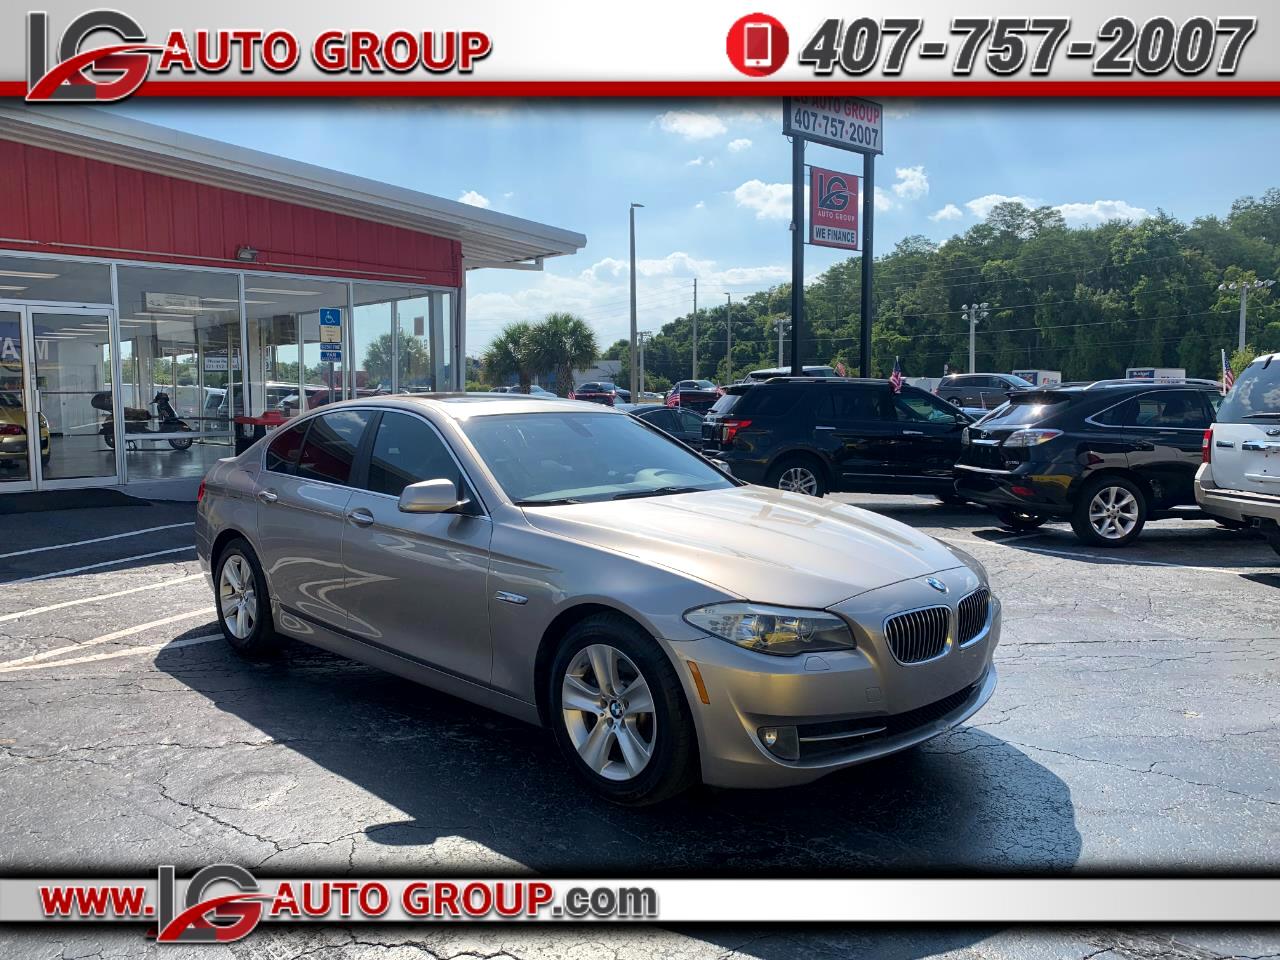 Used 11 Bmw 5 Series 528i For Sale In Orlando Fl Lg Auto Group